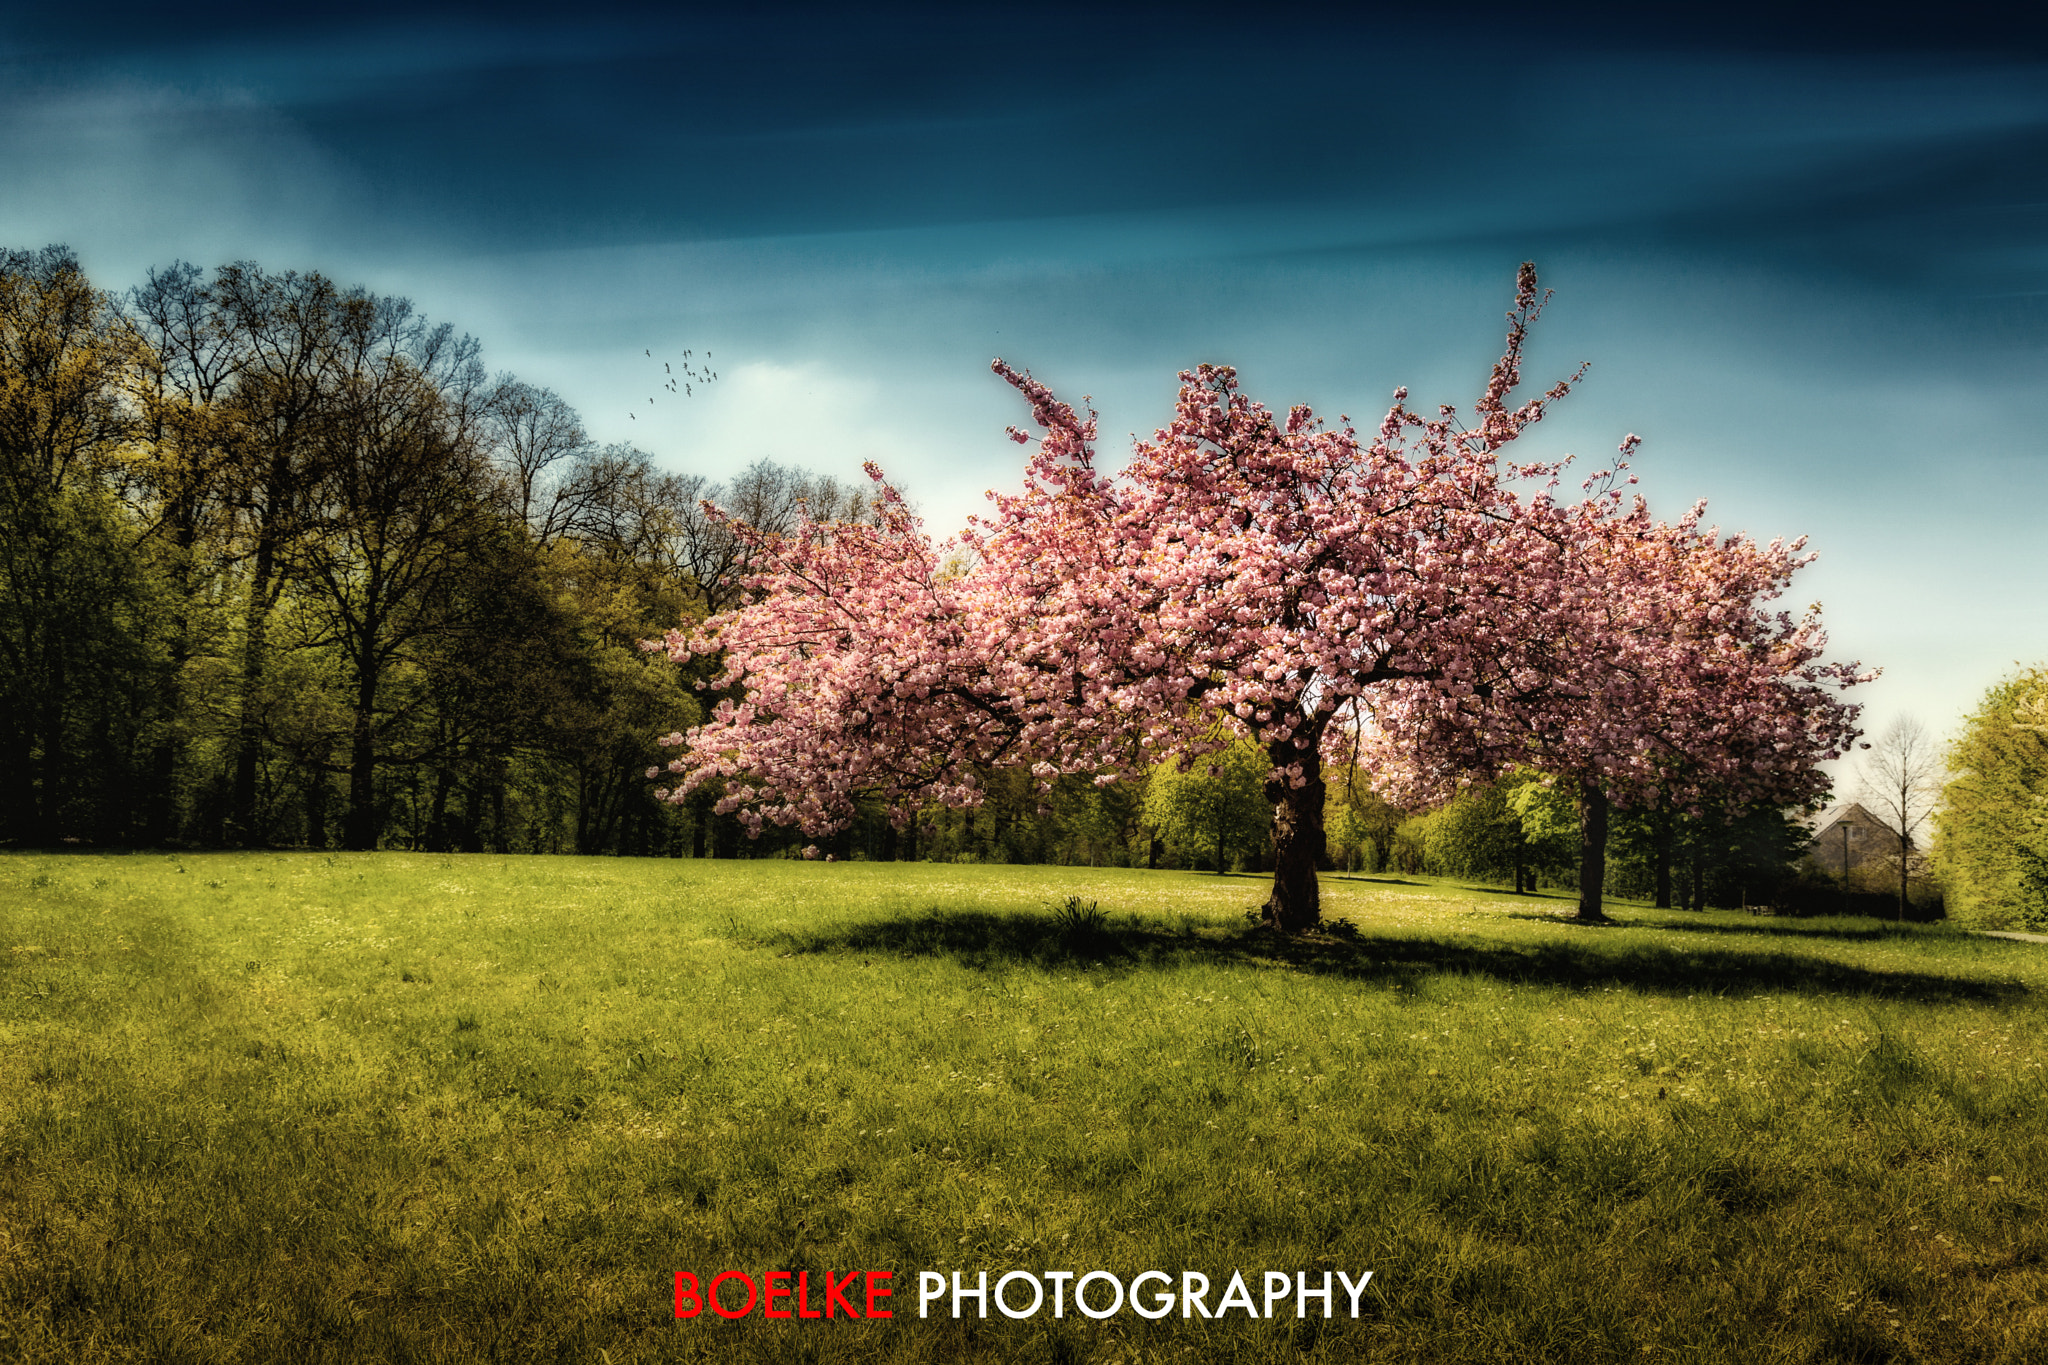 Canon EOS-1Ds Mark III + Sigma 24-105mm f/4 DG OS HSM | A sample photo. Dream tree photography